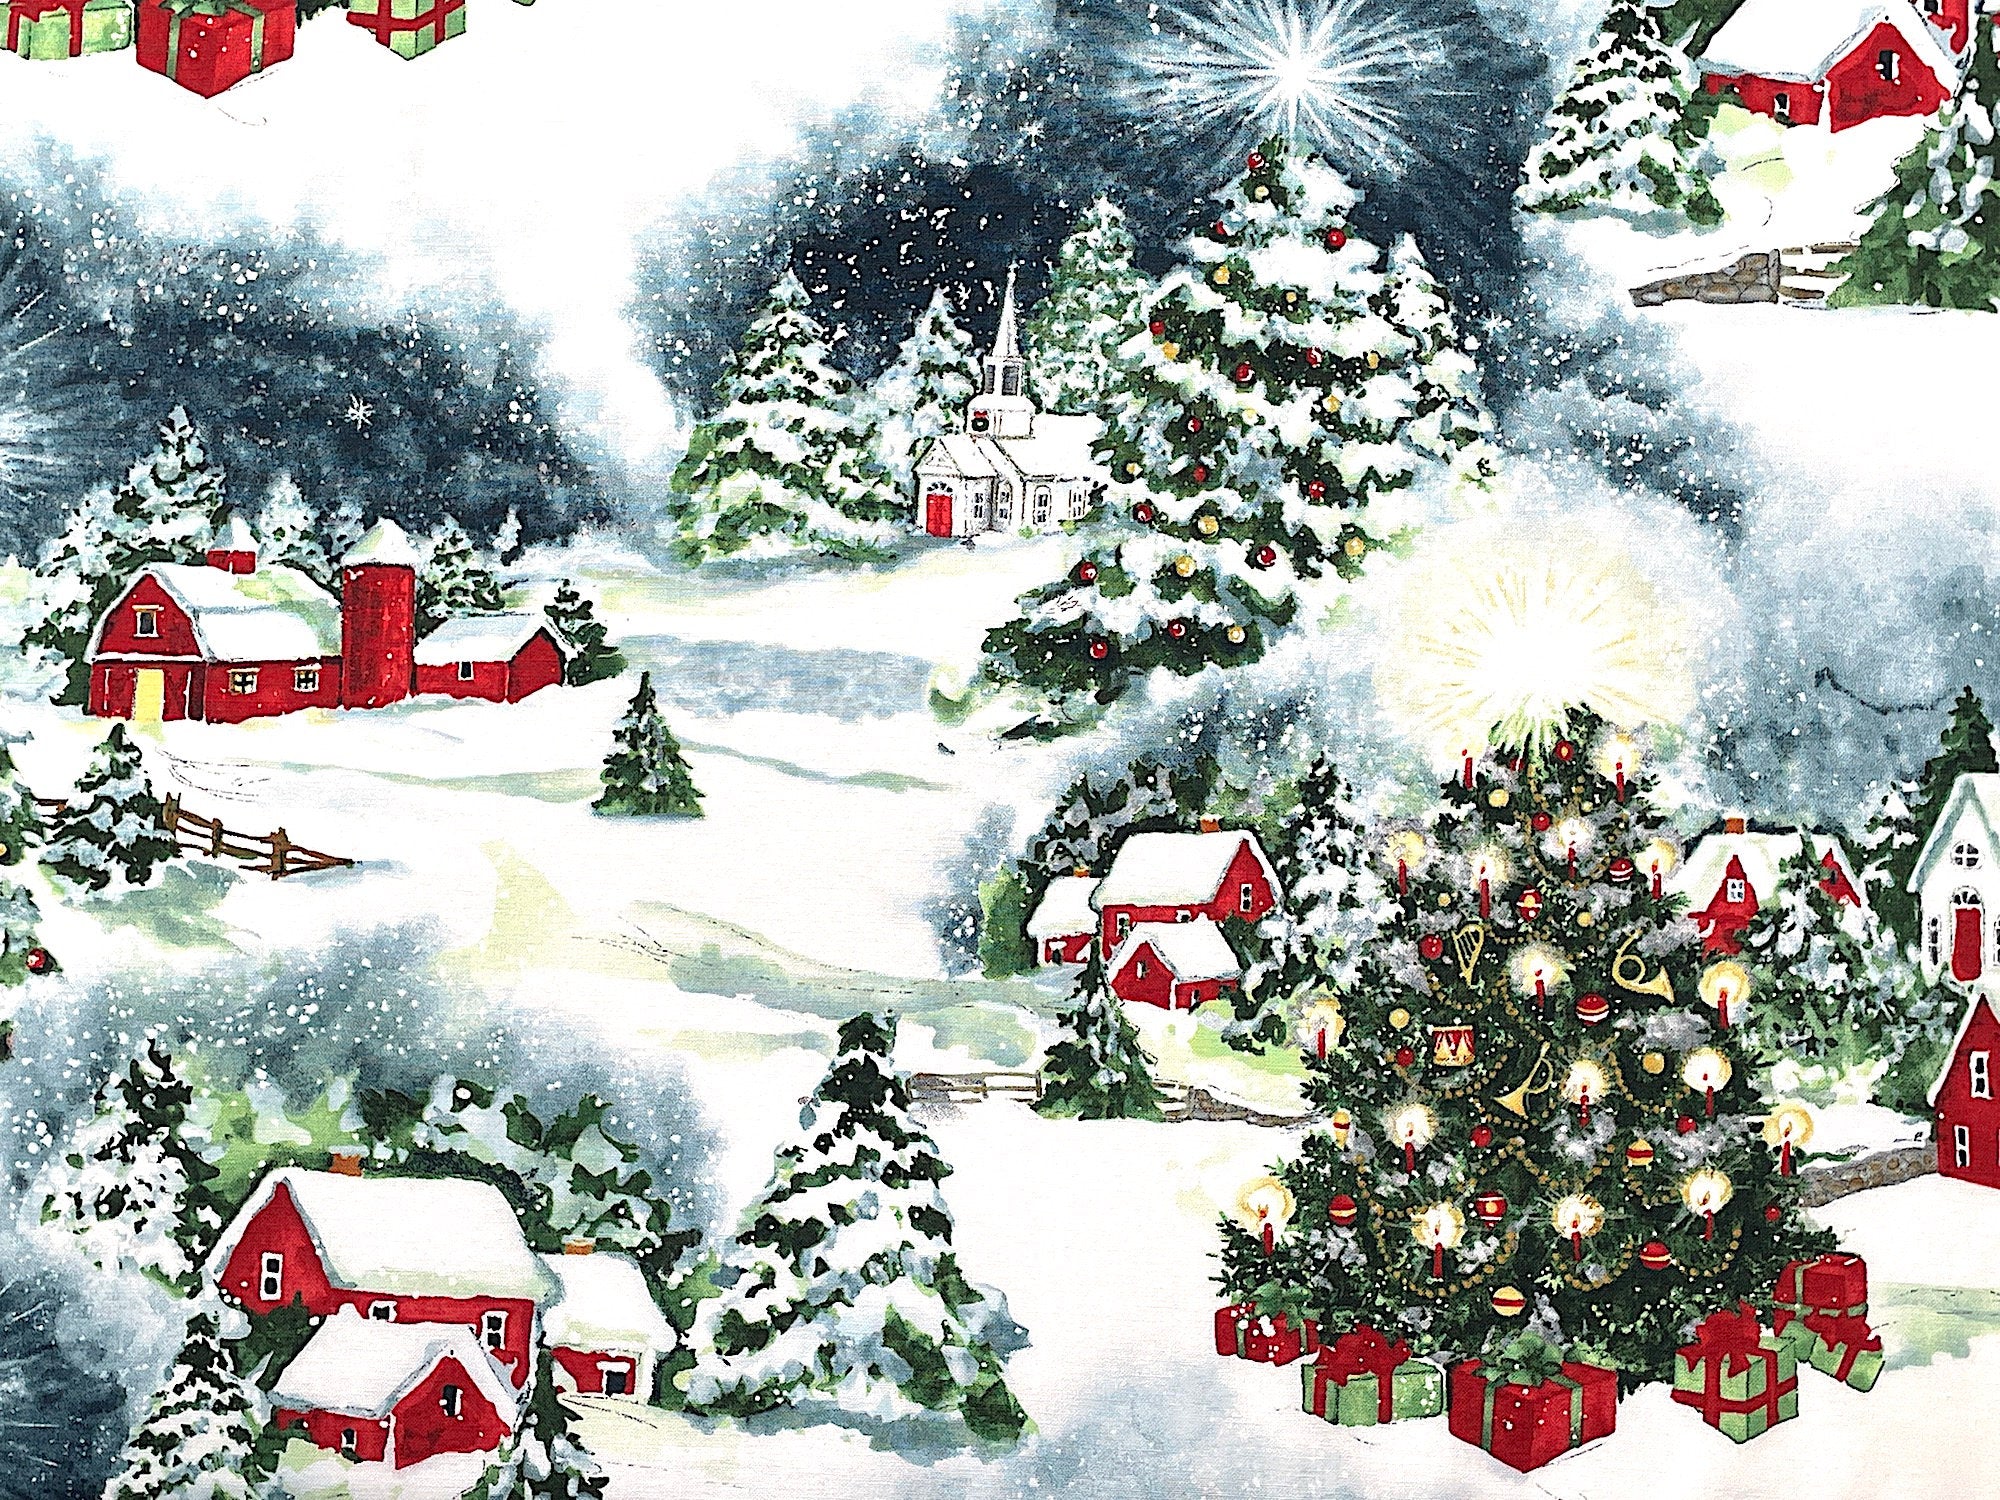 This cotton fabric is called Multi Winter Hollow Scenic. This snow covered fabric is covered with Christmas trees surrounded by presents, and various buildings.